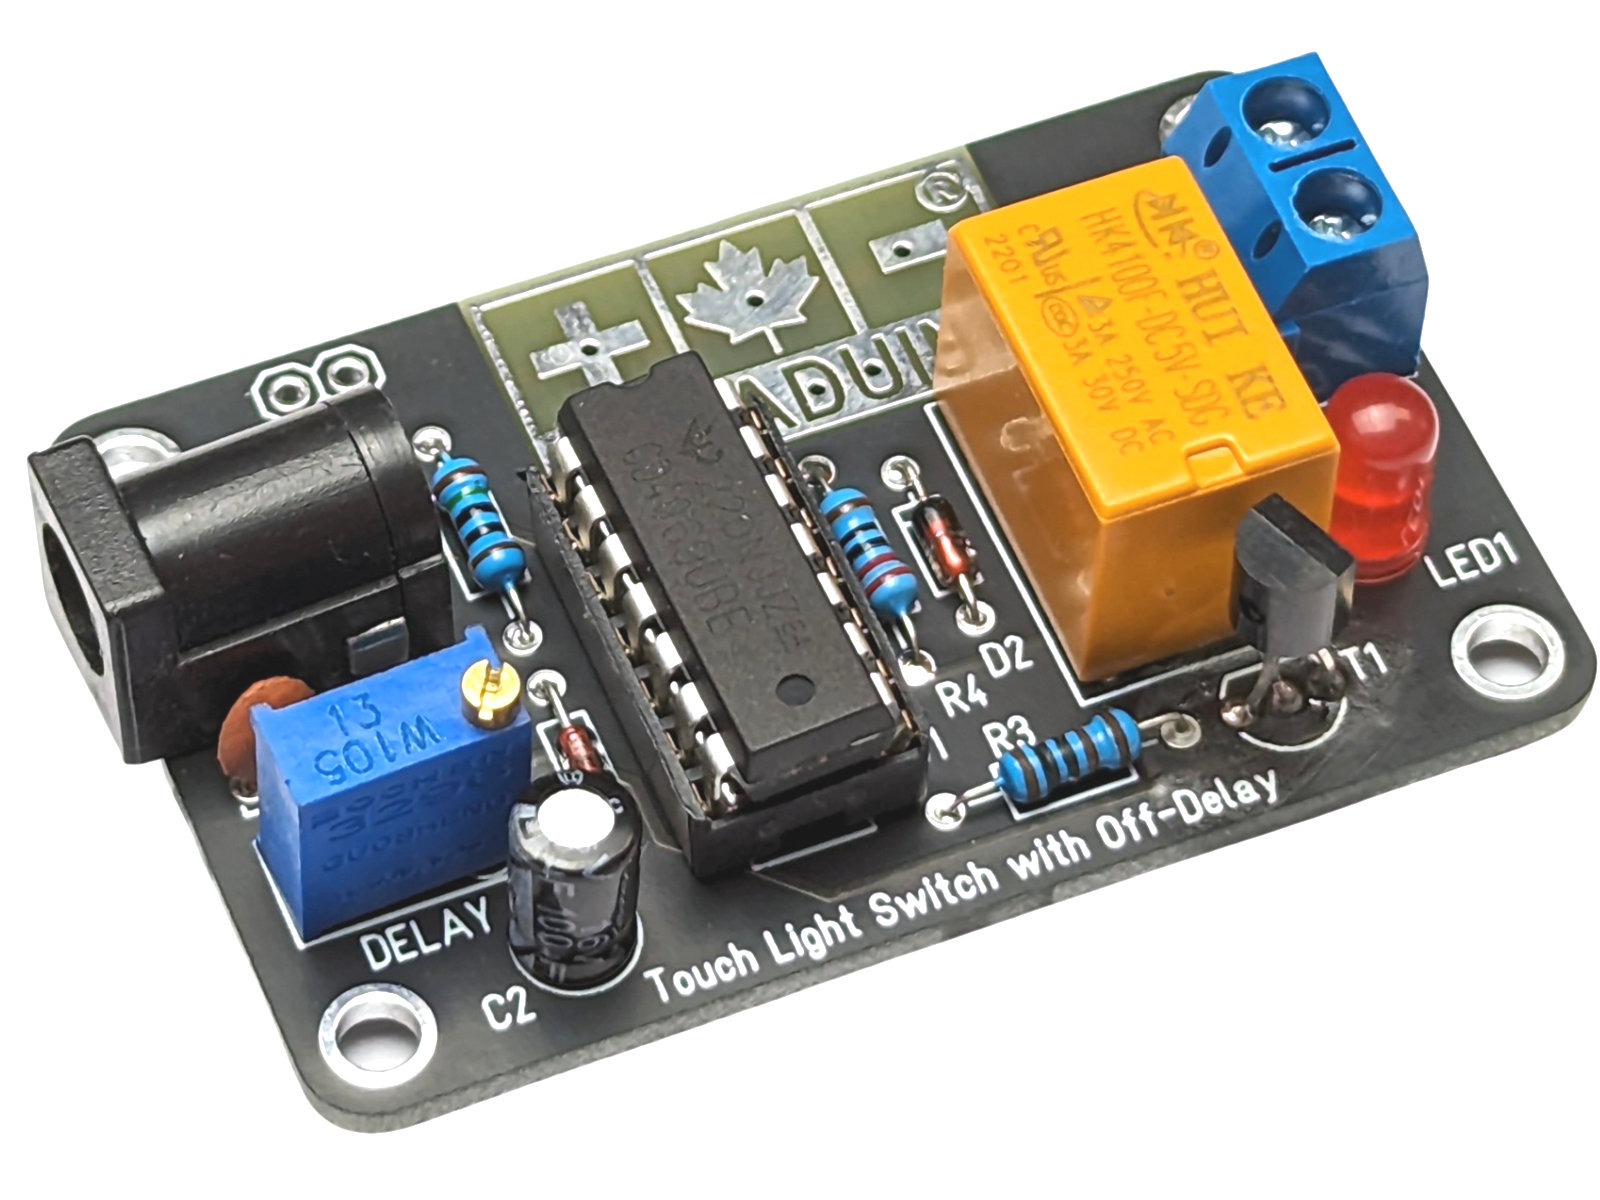 26852 touch light switch with off delay 2